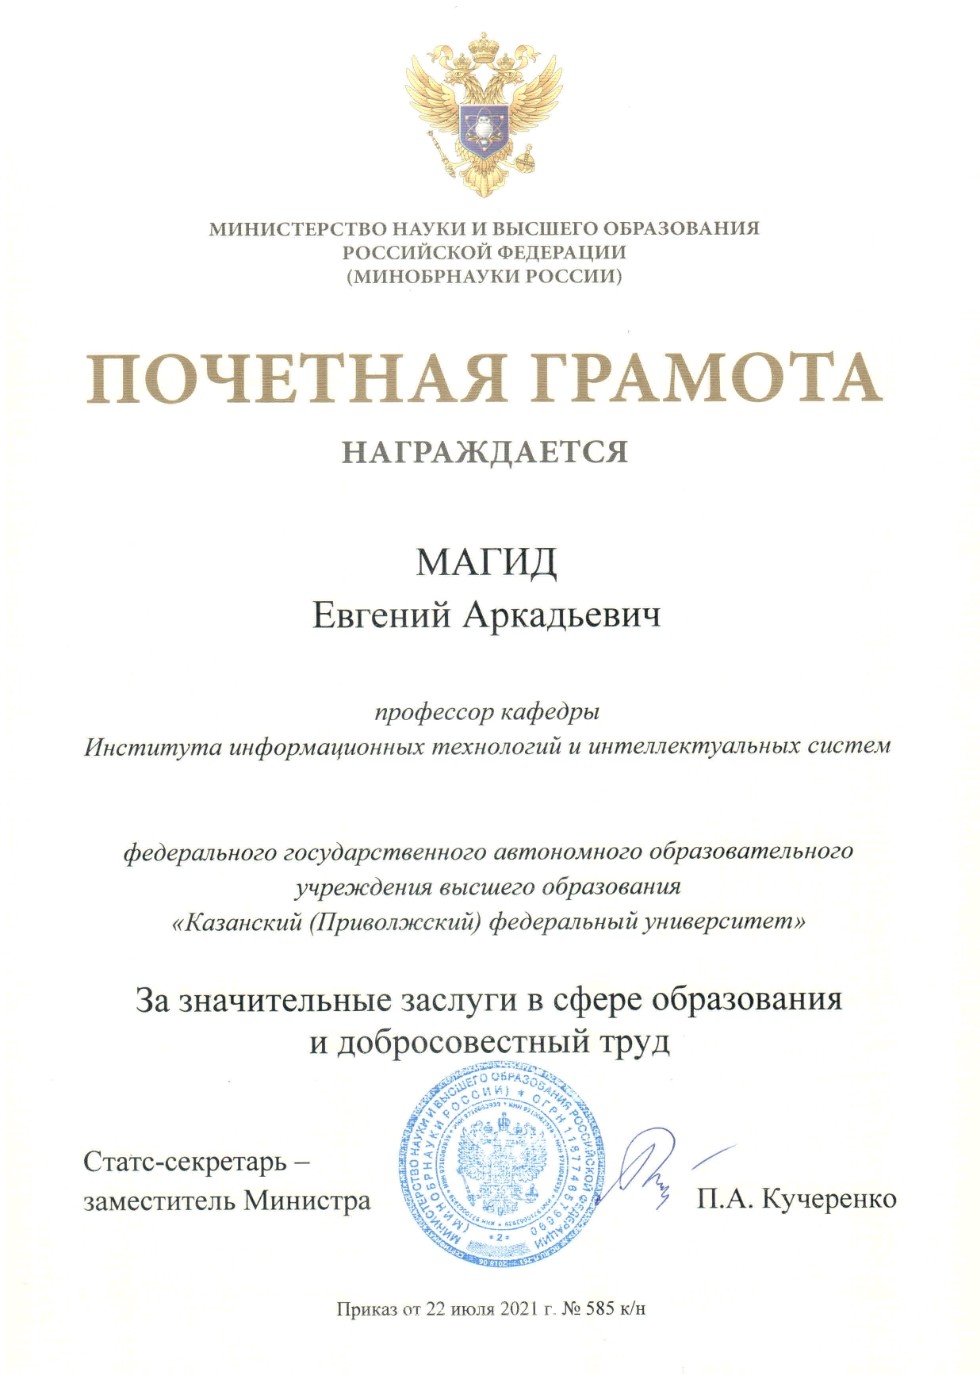 Evgeni Magid was awarded a certificate of honor by the Ministry of Science and Higher Education of the Russian Federation